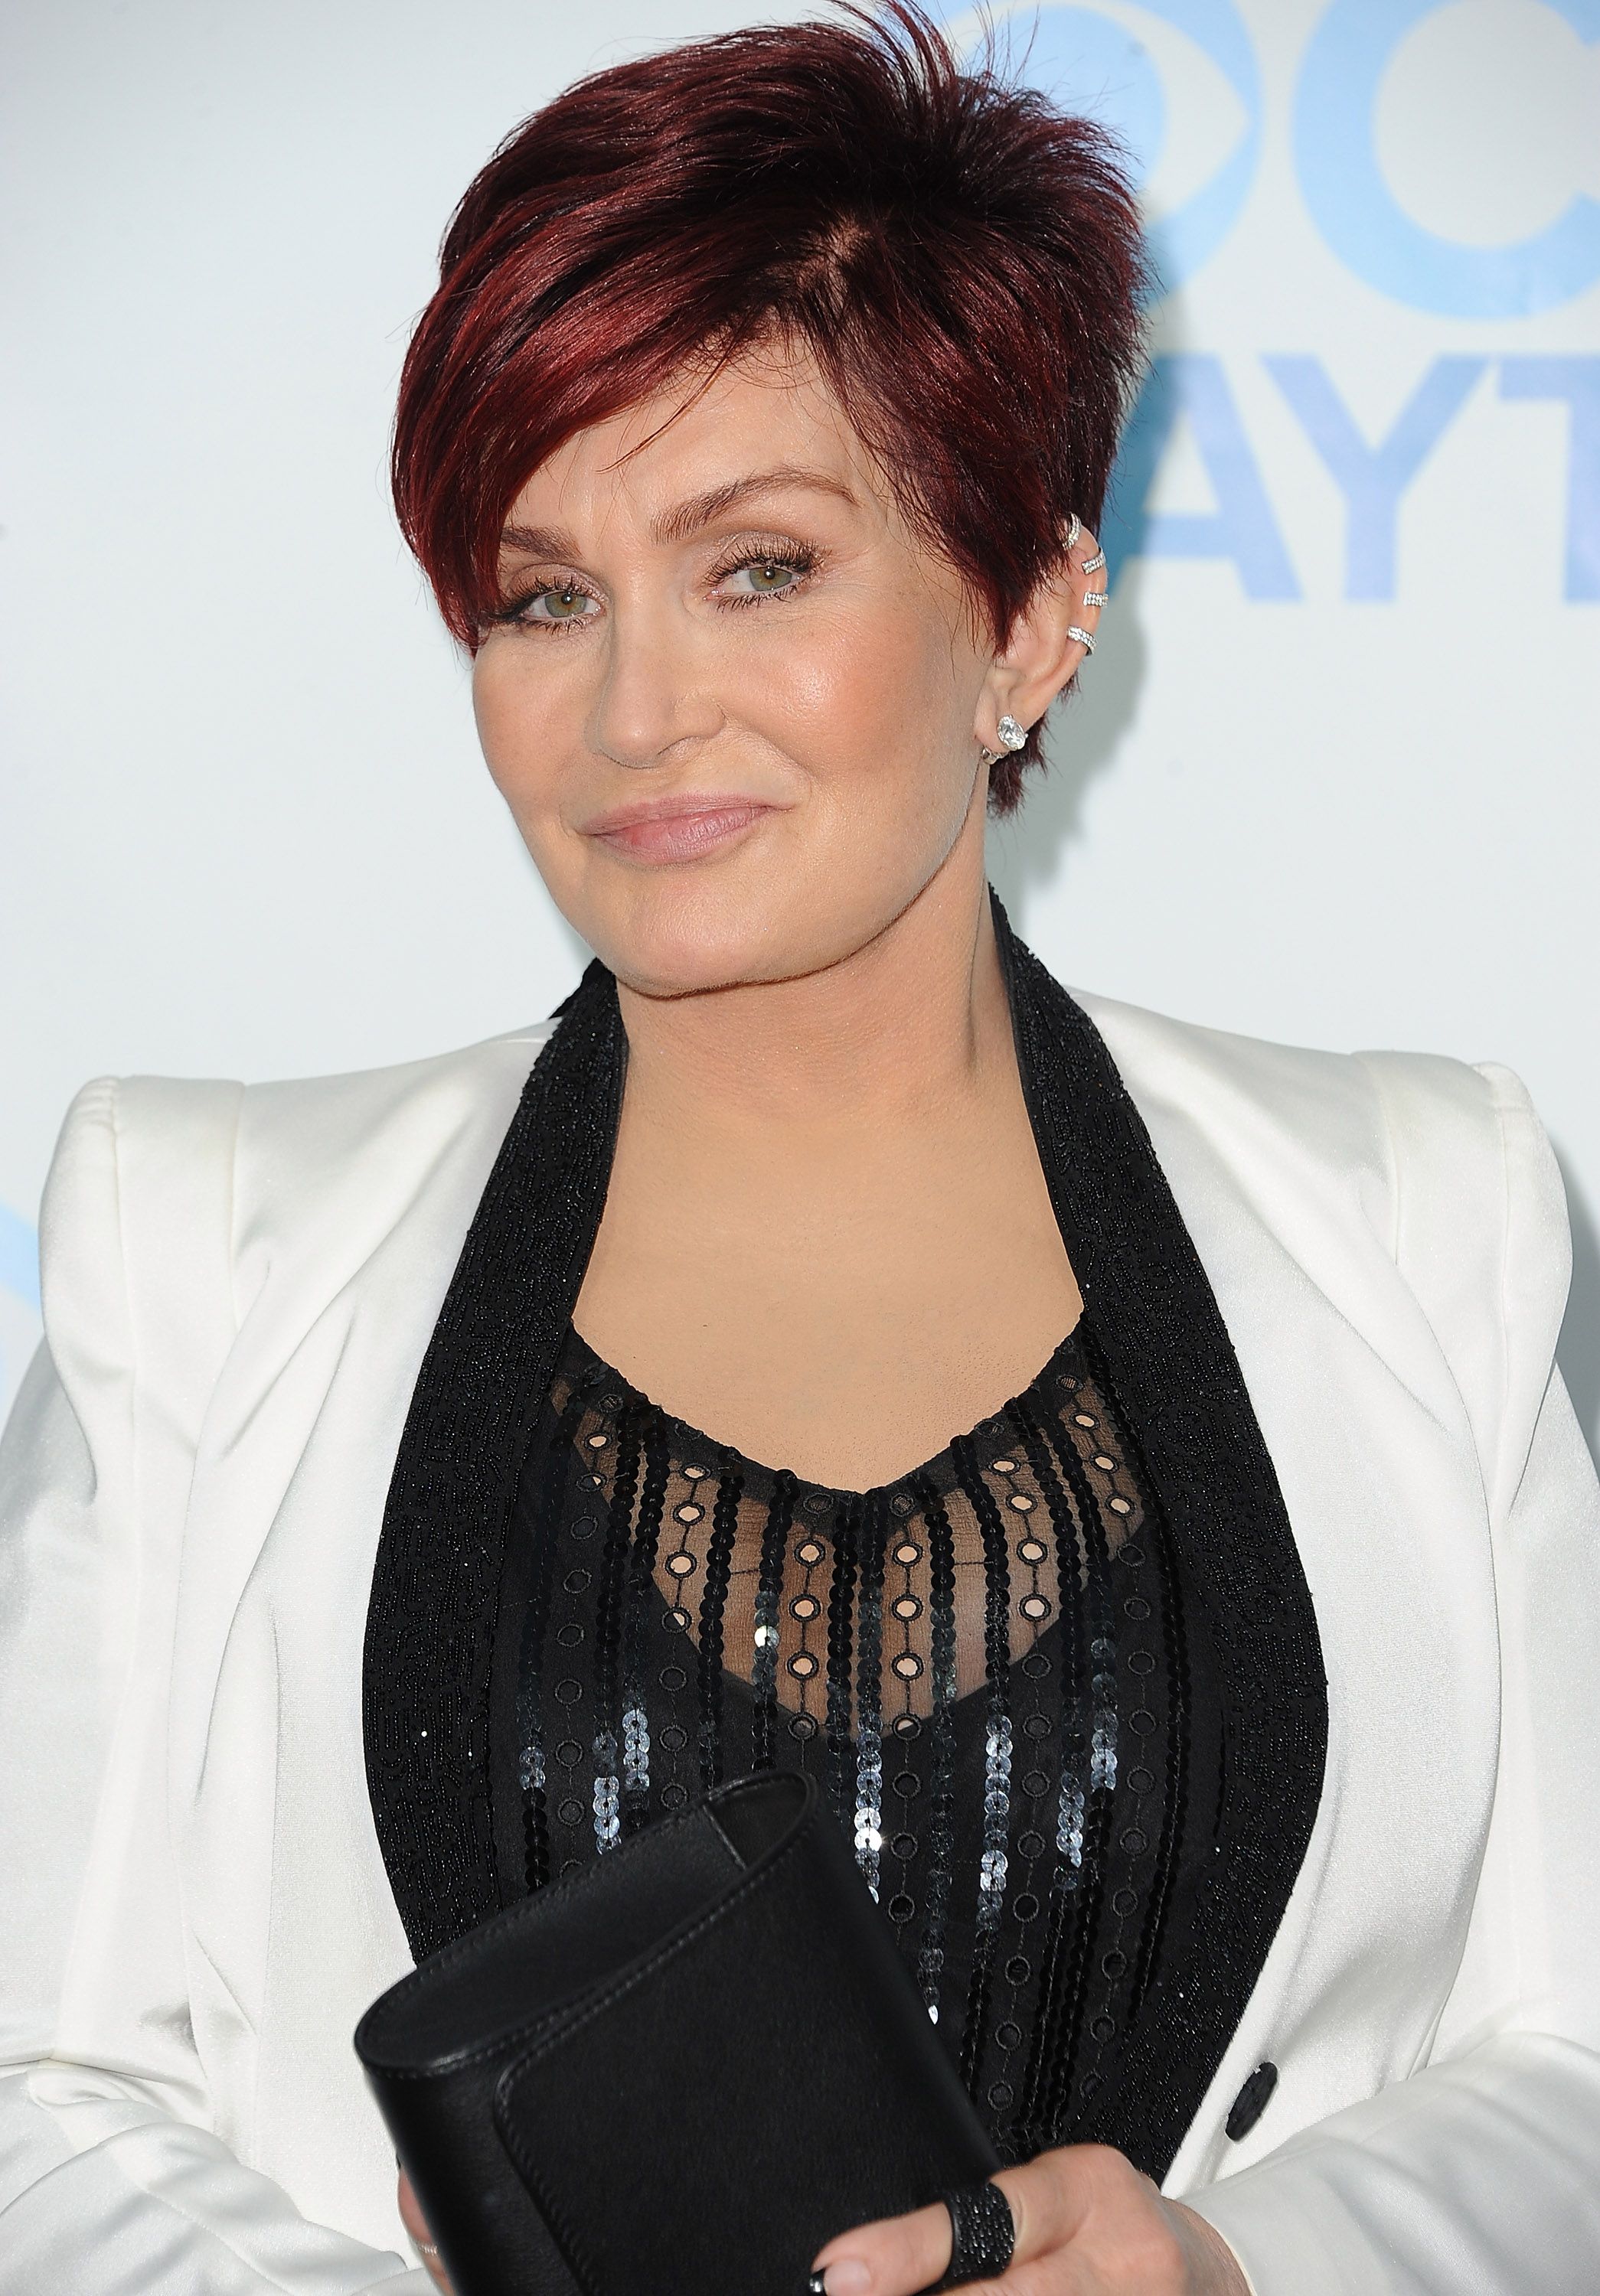 Sharon Osbourne during the 41st Annual Daytime Emmy Awards CBS after party on June 22, 2014. | Source: Getty Images